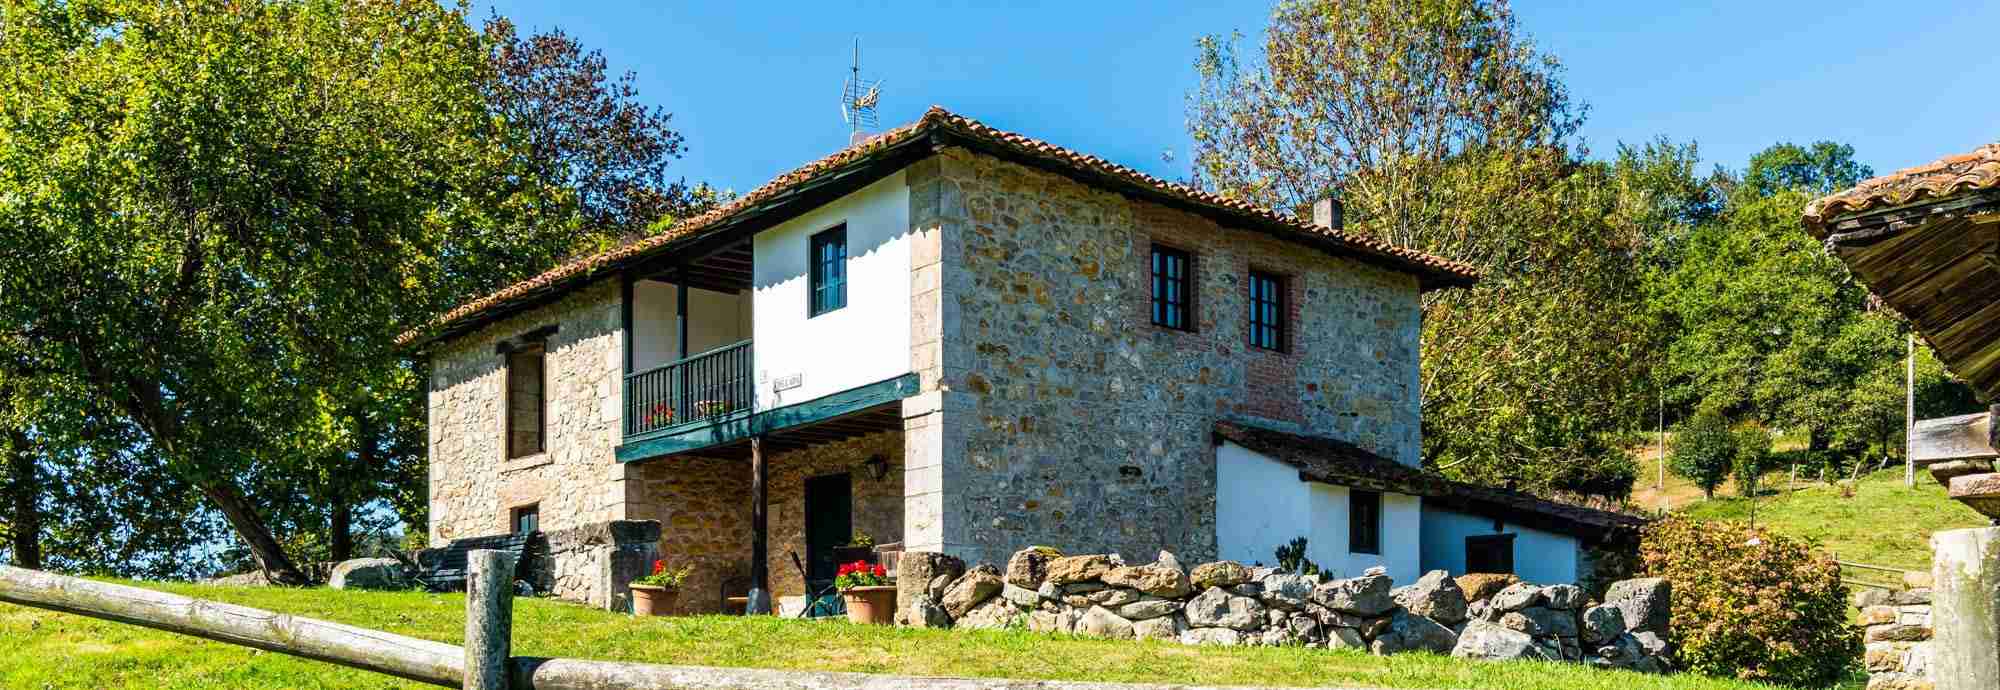 Secluded Asturias cottage for holidays in Northern Spain